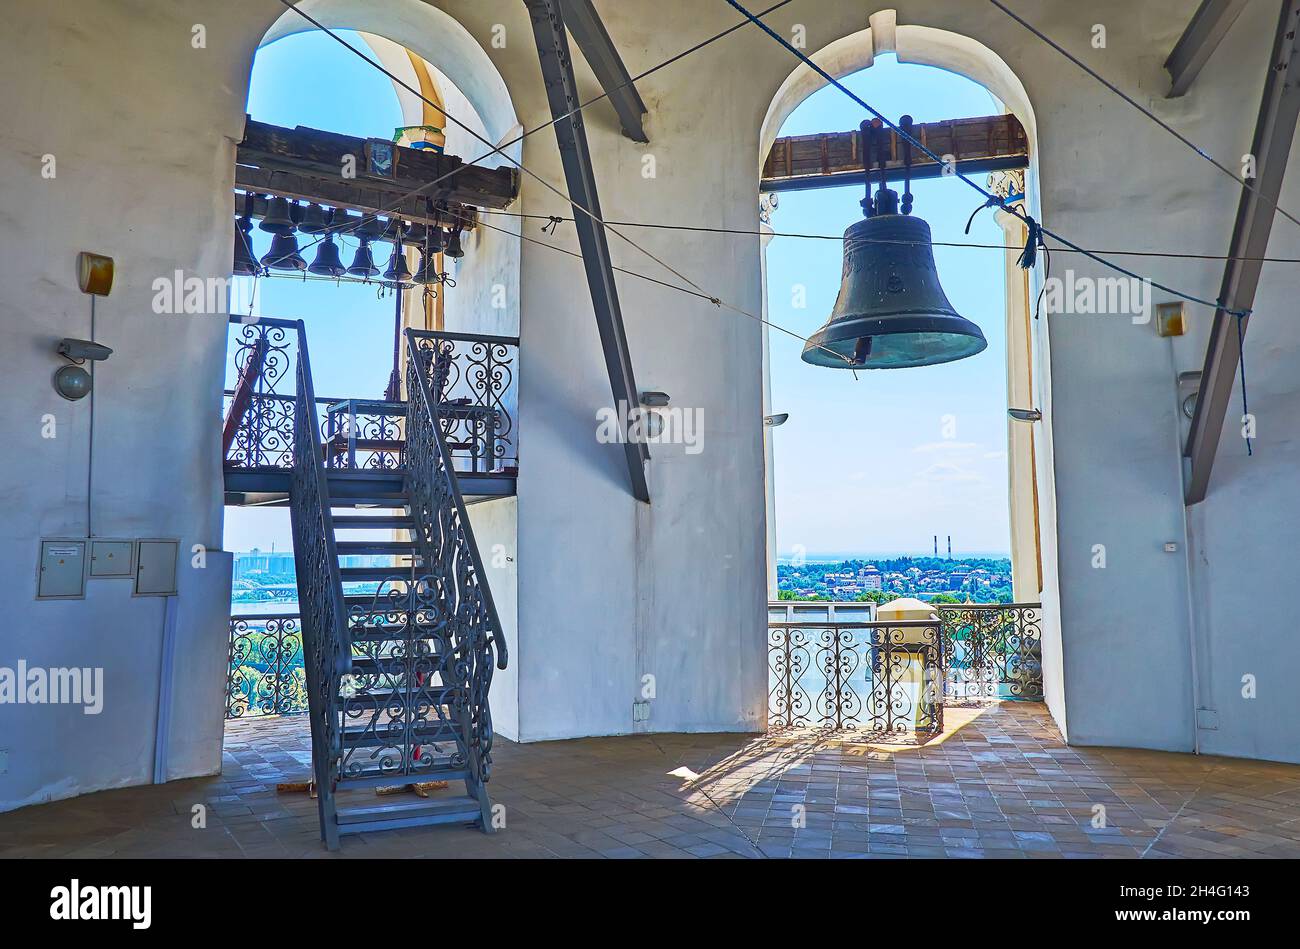 The upper terrace with bells of the medieval Great Bell Tower of Kyiv Pechersk Lavra Monastery, Kyiv, Ukraine Stock Photo